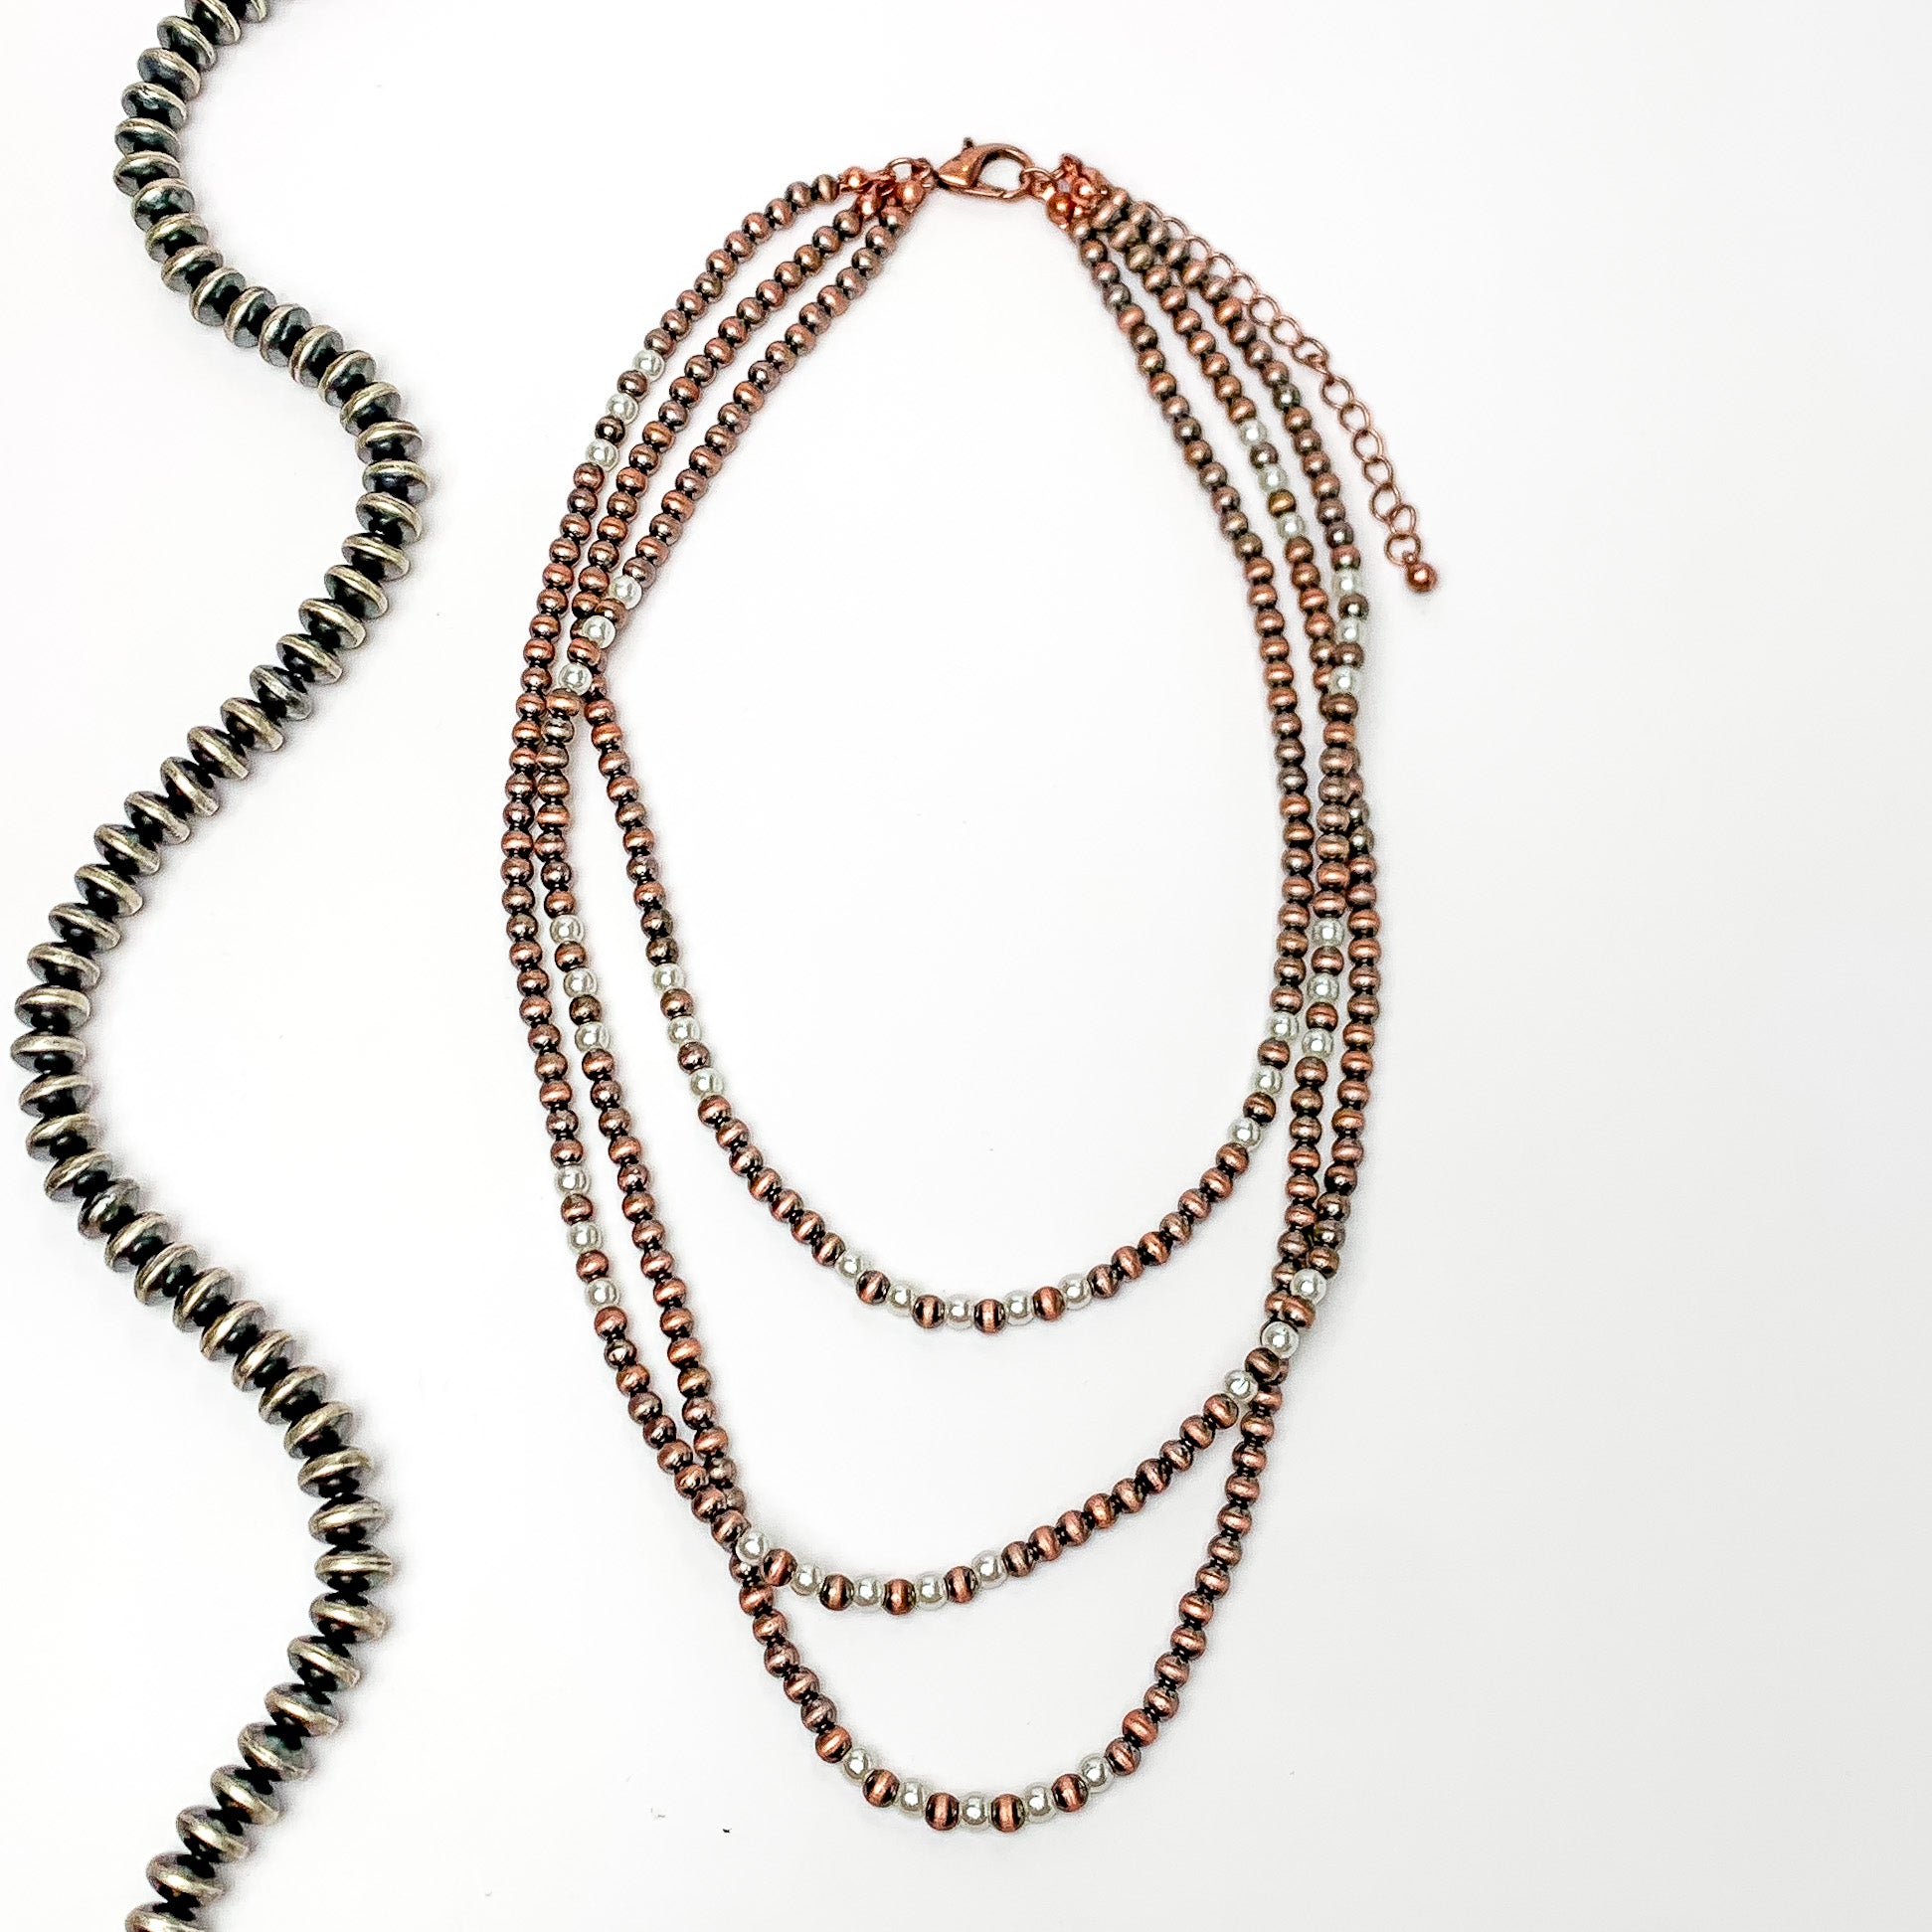 There stands of copper faux navajo pearls with white pearls as well. Pictures on a white background with a strand of silver beads to the left.